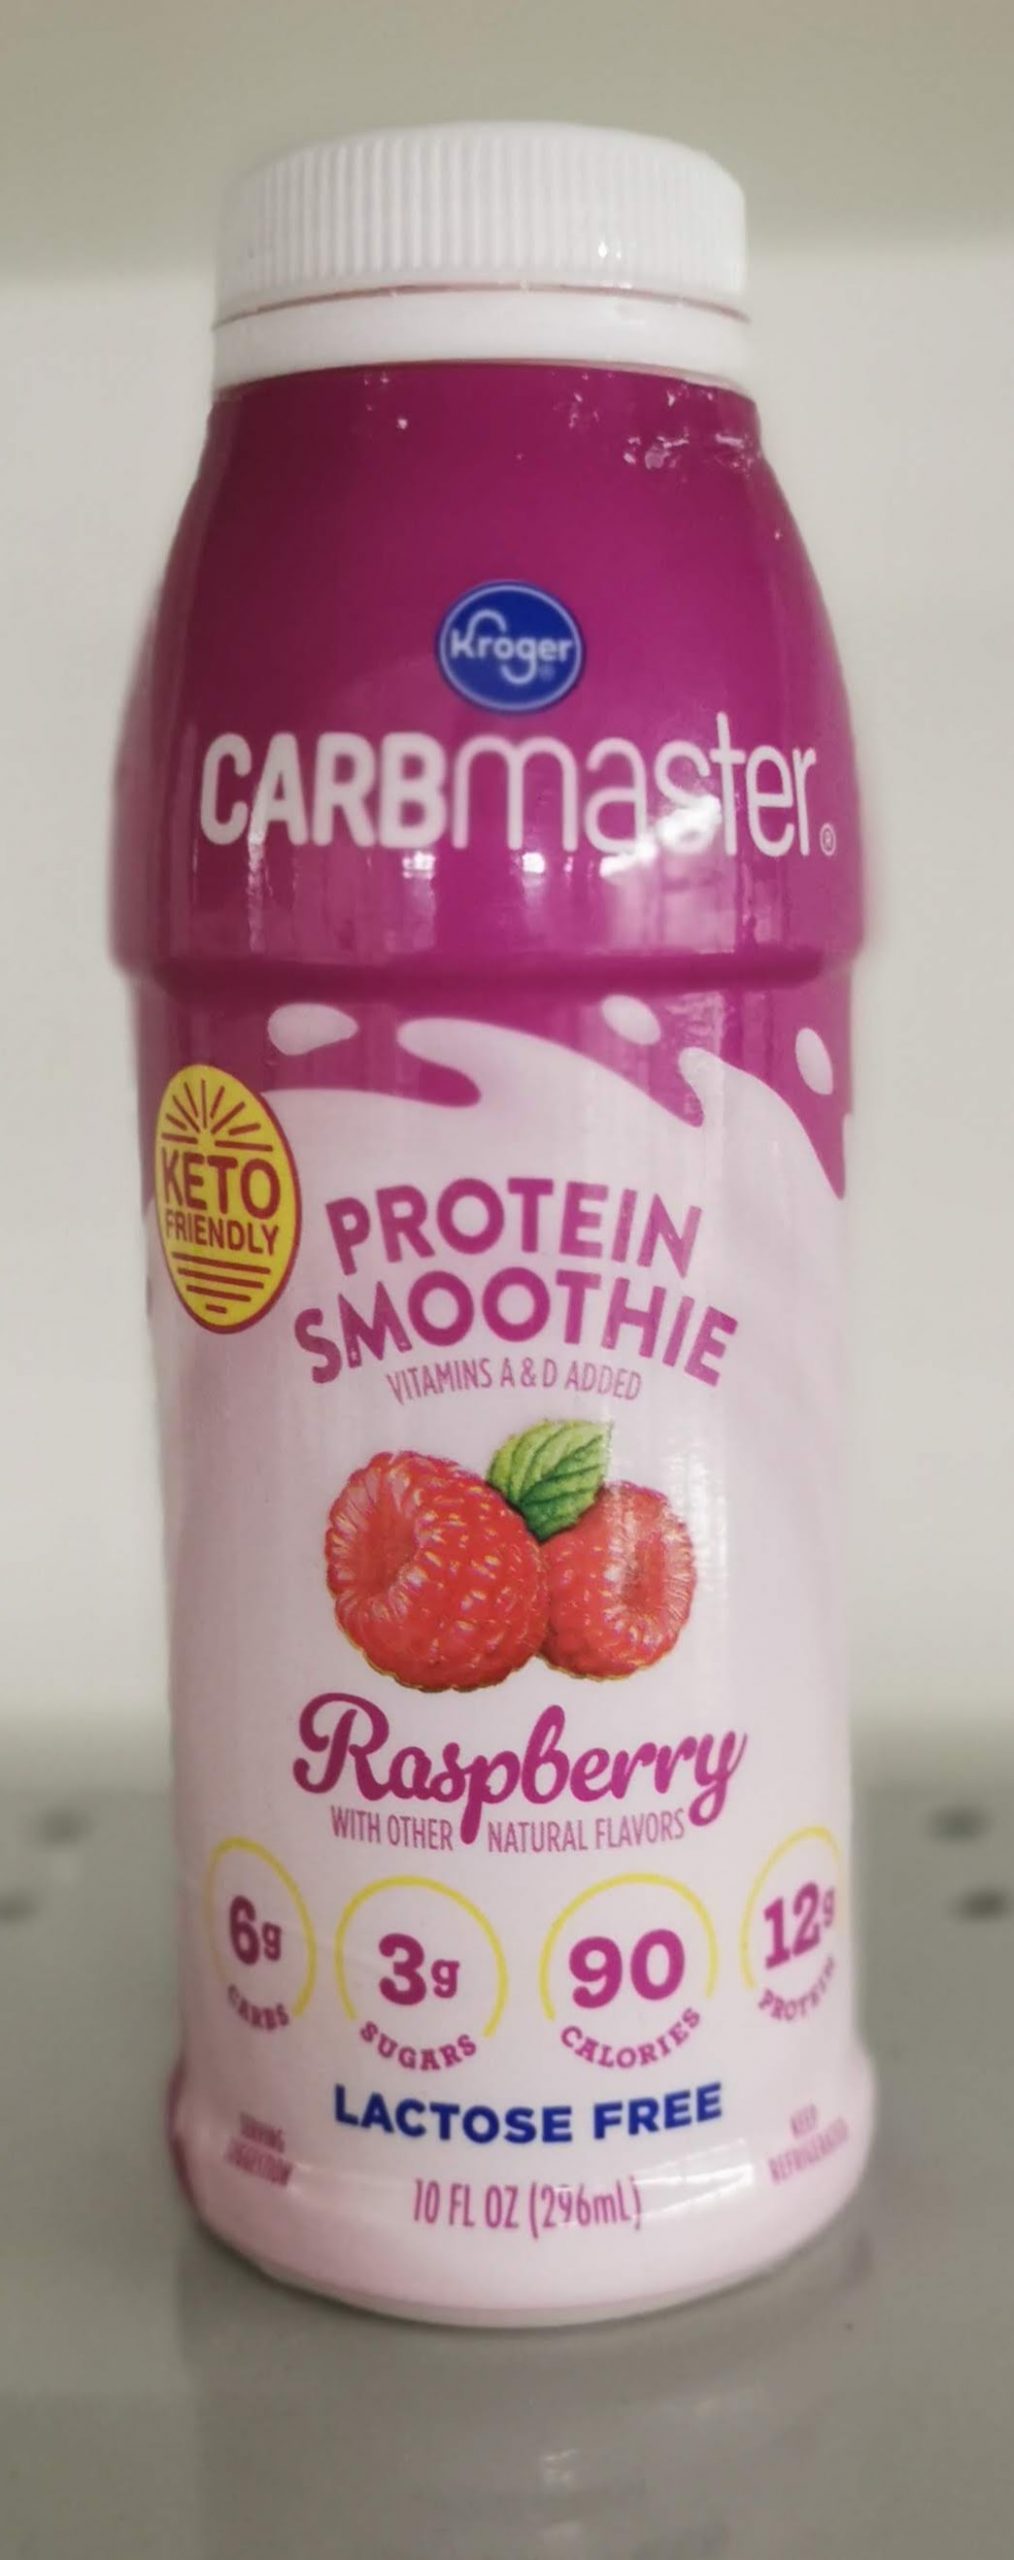 You are currently viewing Carbmaster Keto Friendly Raspberry Protein Smoothie (Kroger)